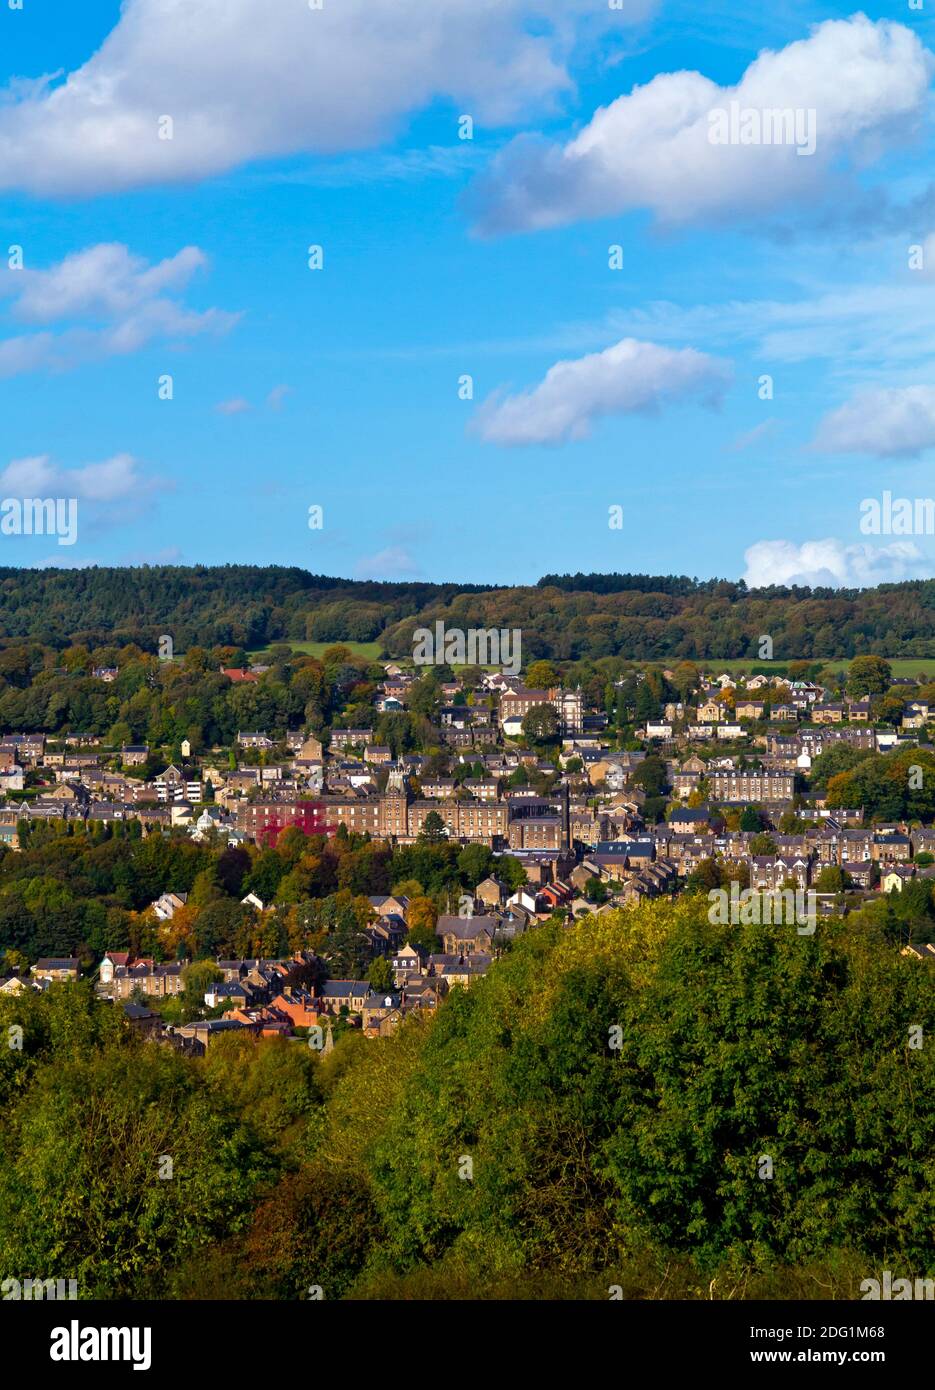 View over Matlock in the Derbyshire Peak District England UK the county town of Derbyshire and a spa town popular with tourists. Stock Photo